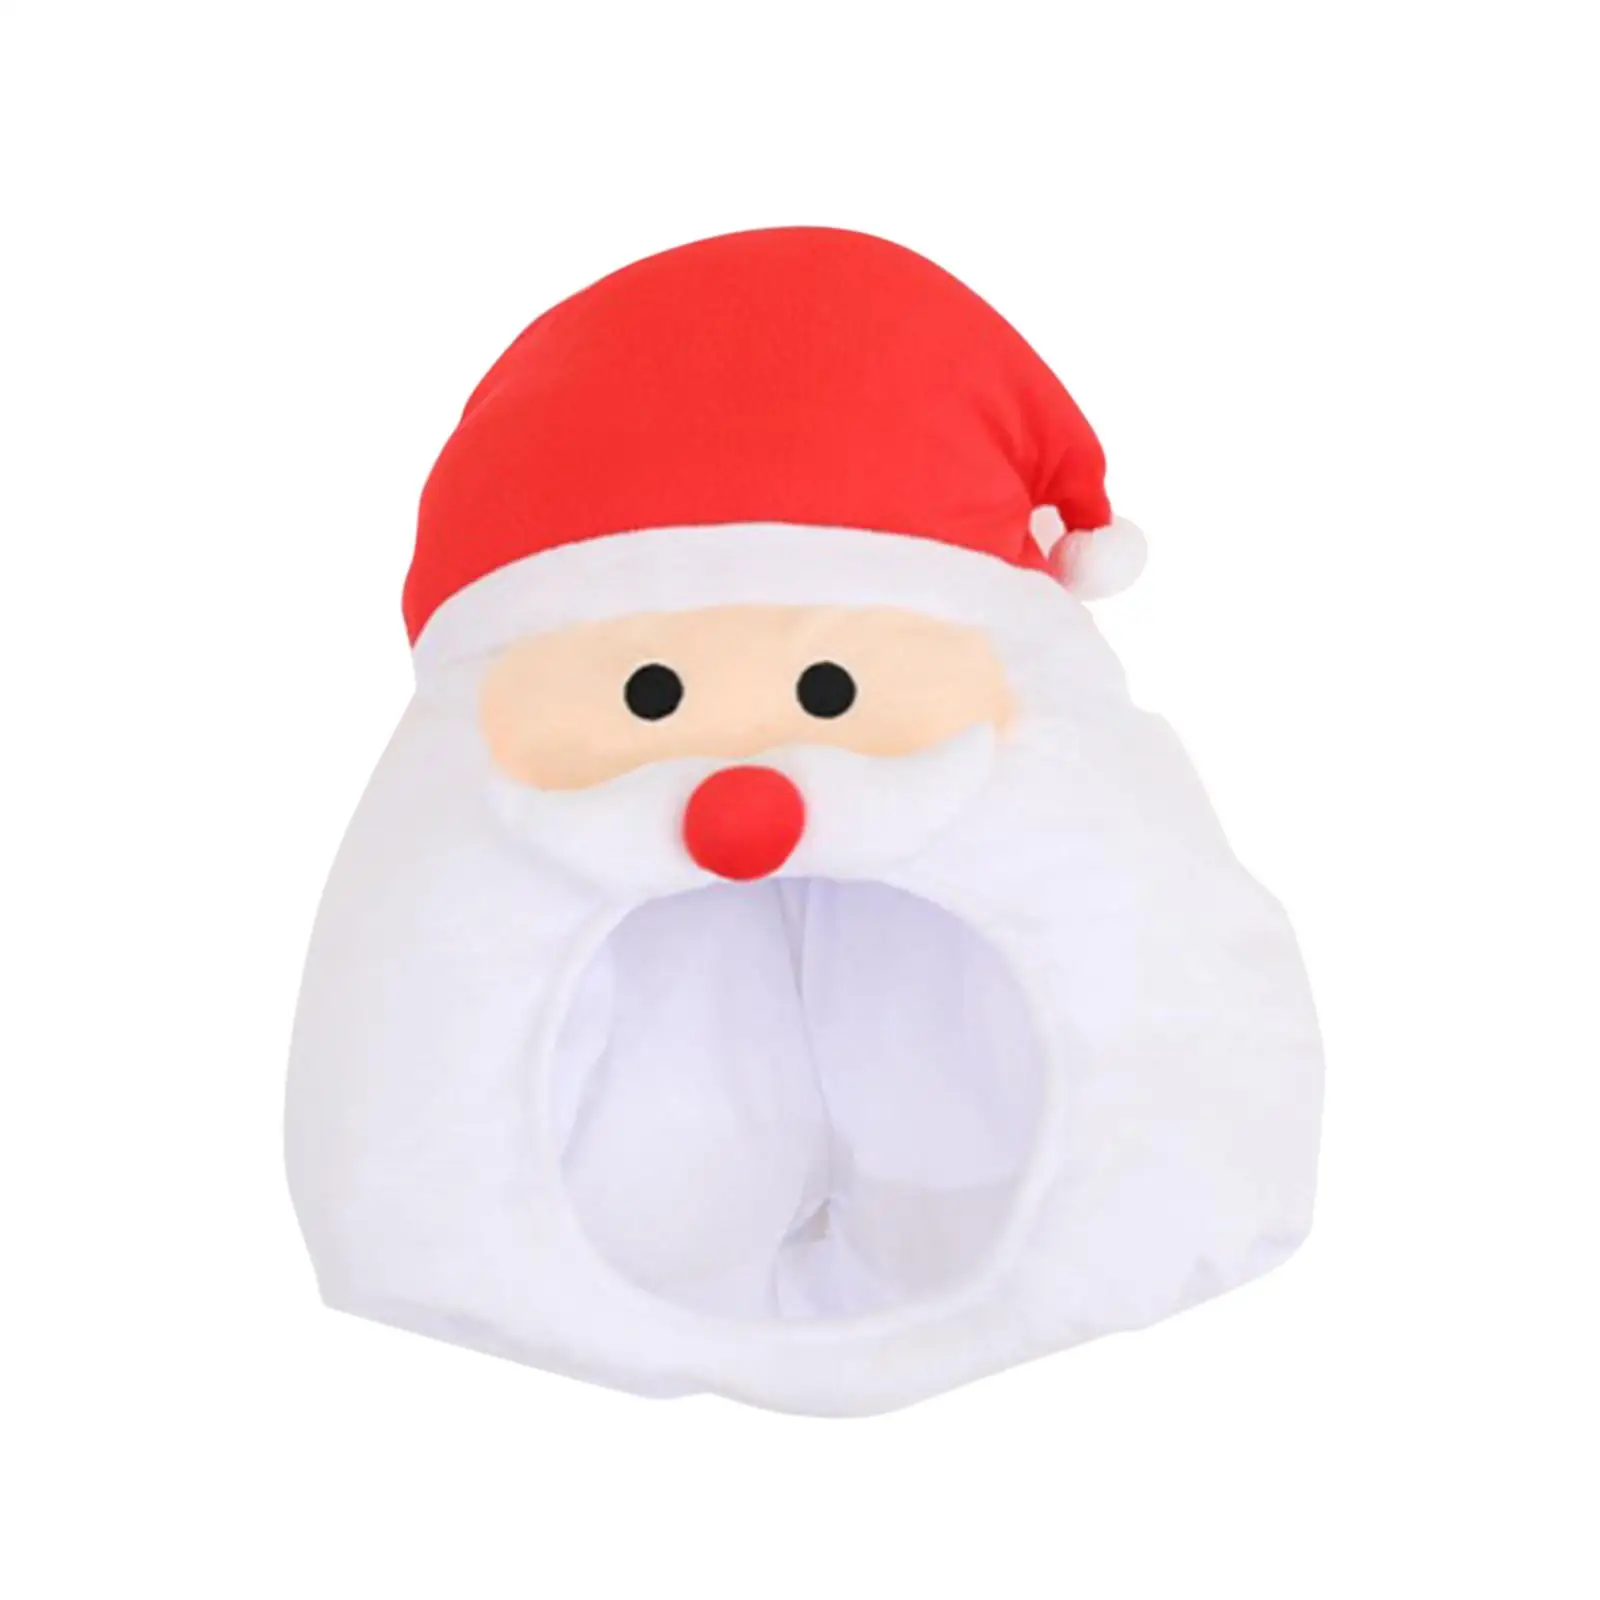 Santa Claus Hat Cosplay Costume Hats for Holiday Stage Performance New Year